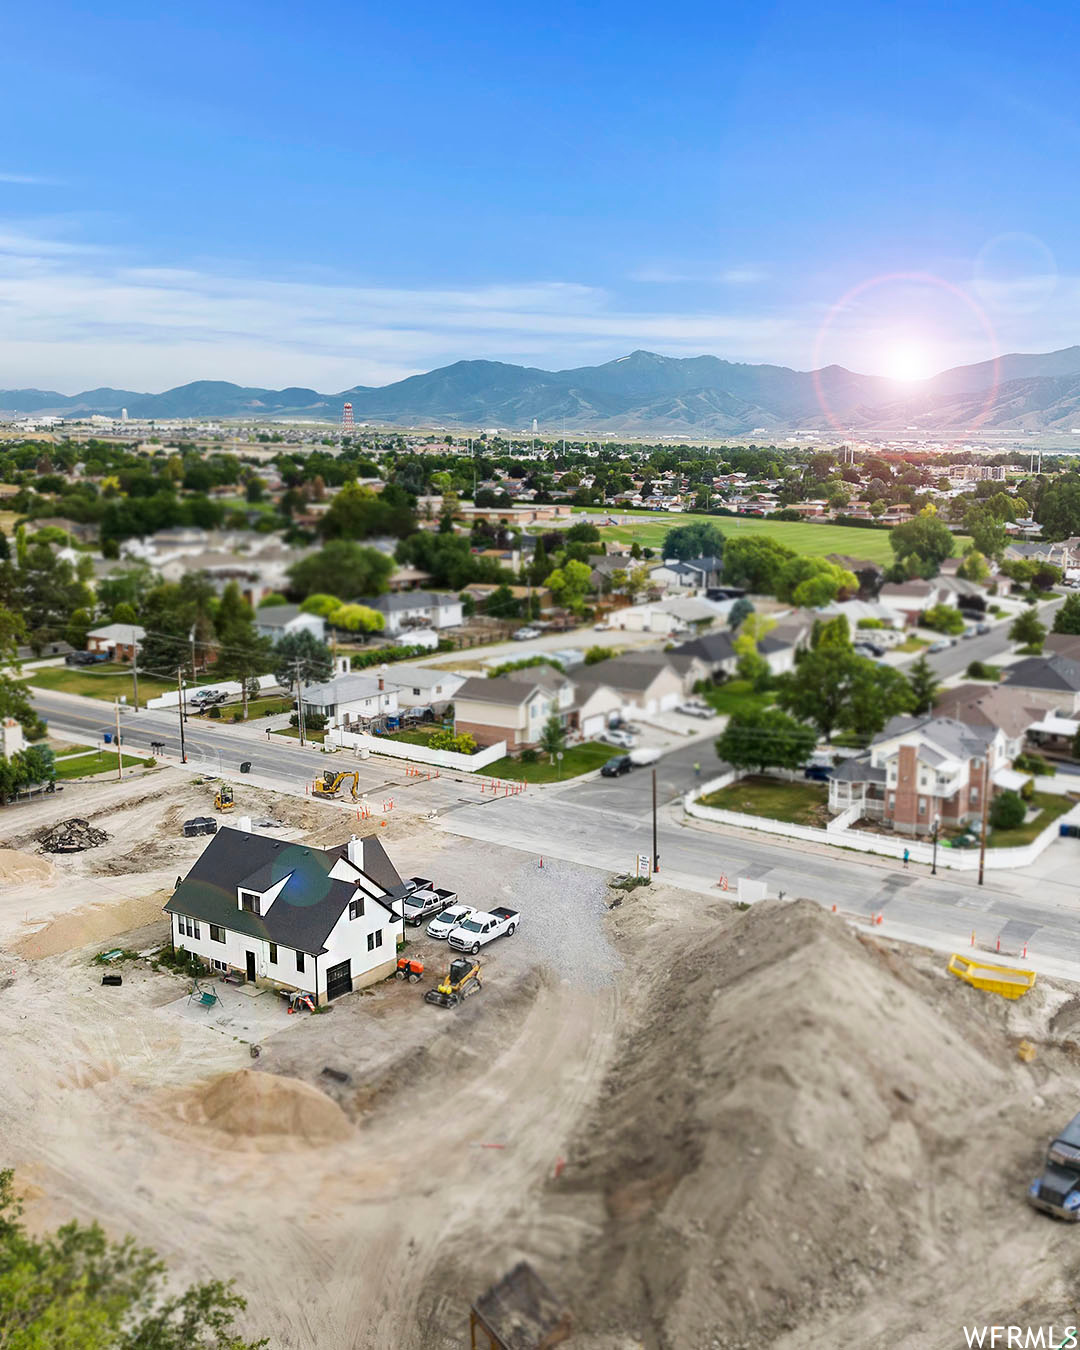 3777 S 5200 W #102, West Valley City, Utah 84120, ,Land,For sale,5200,1885002